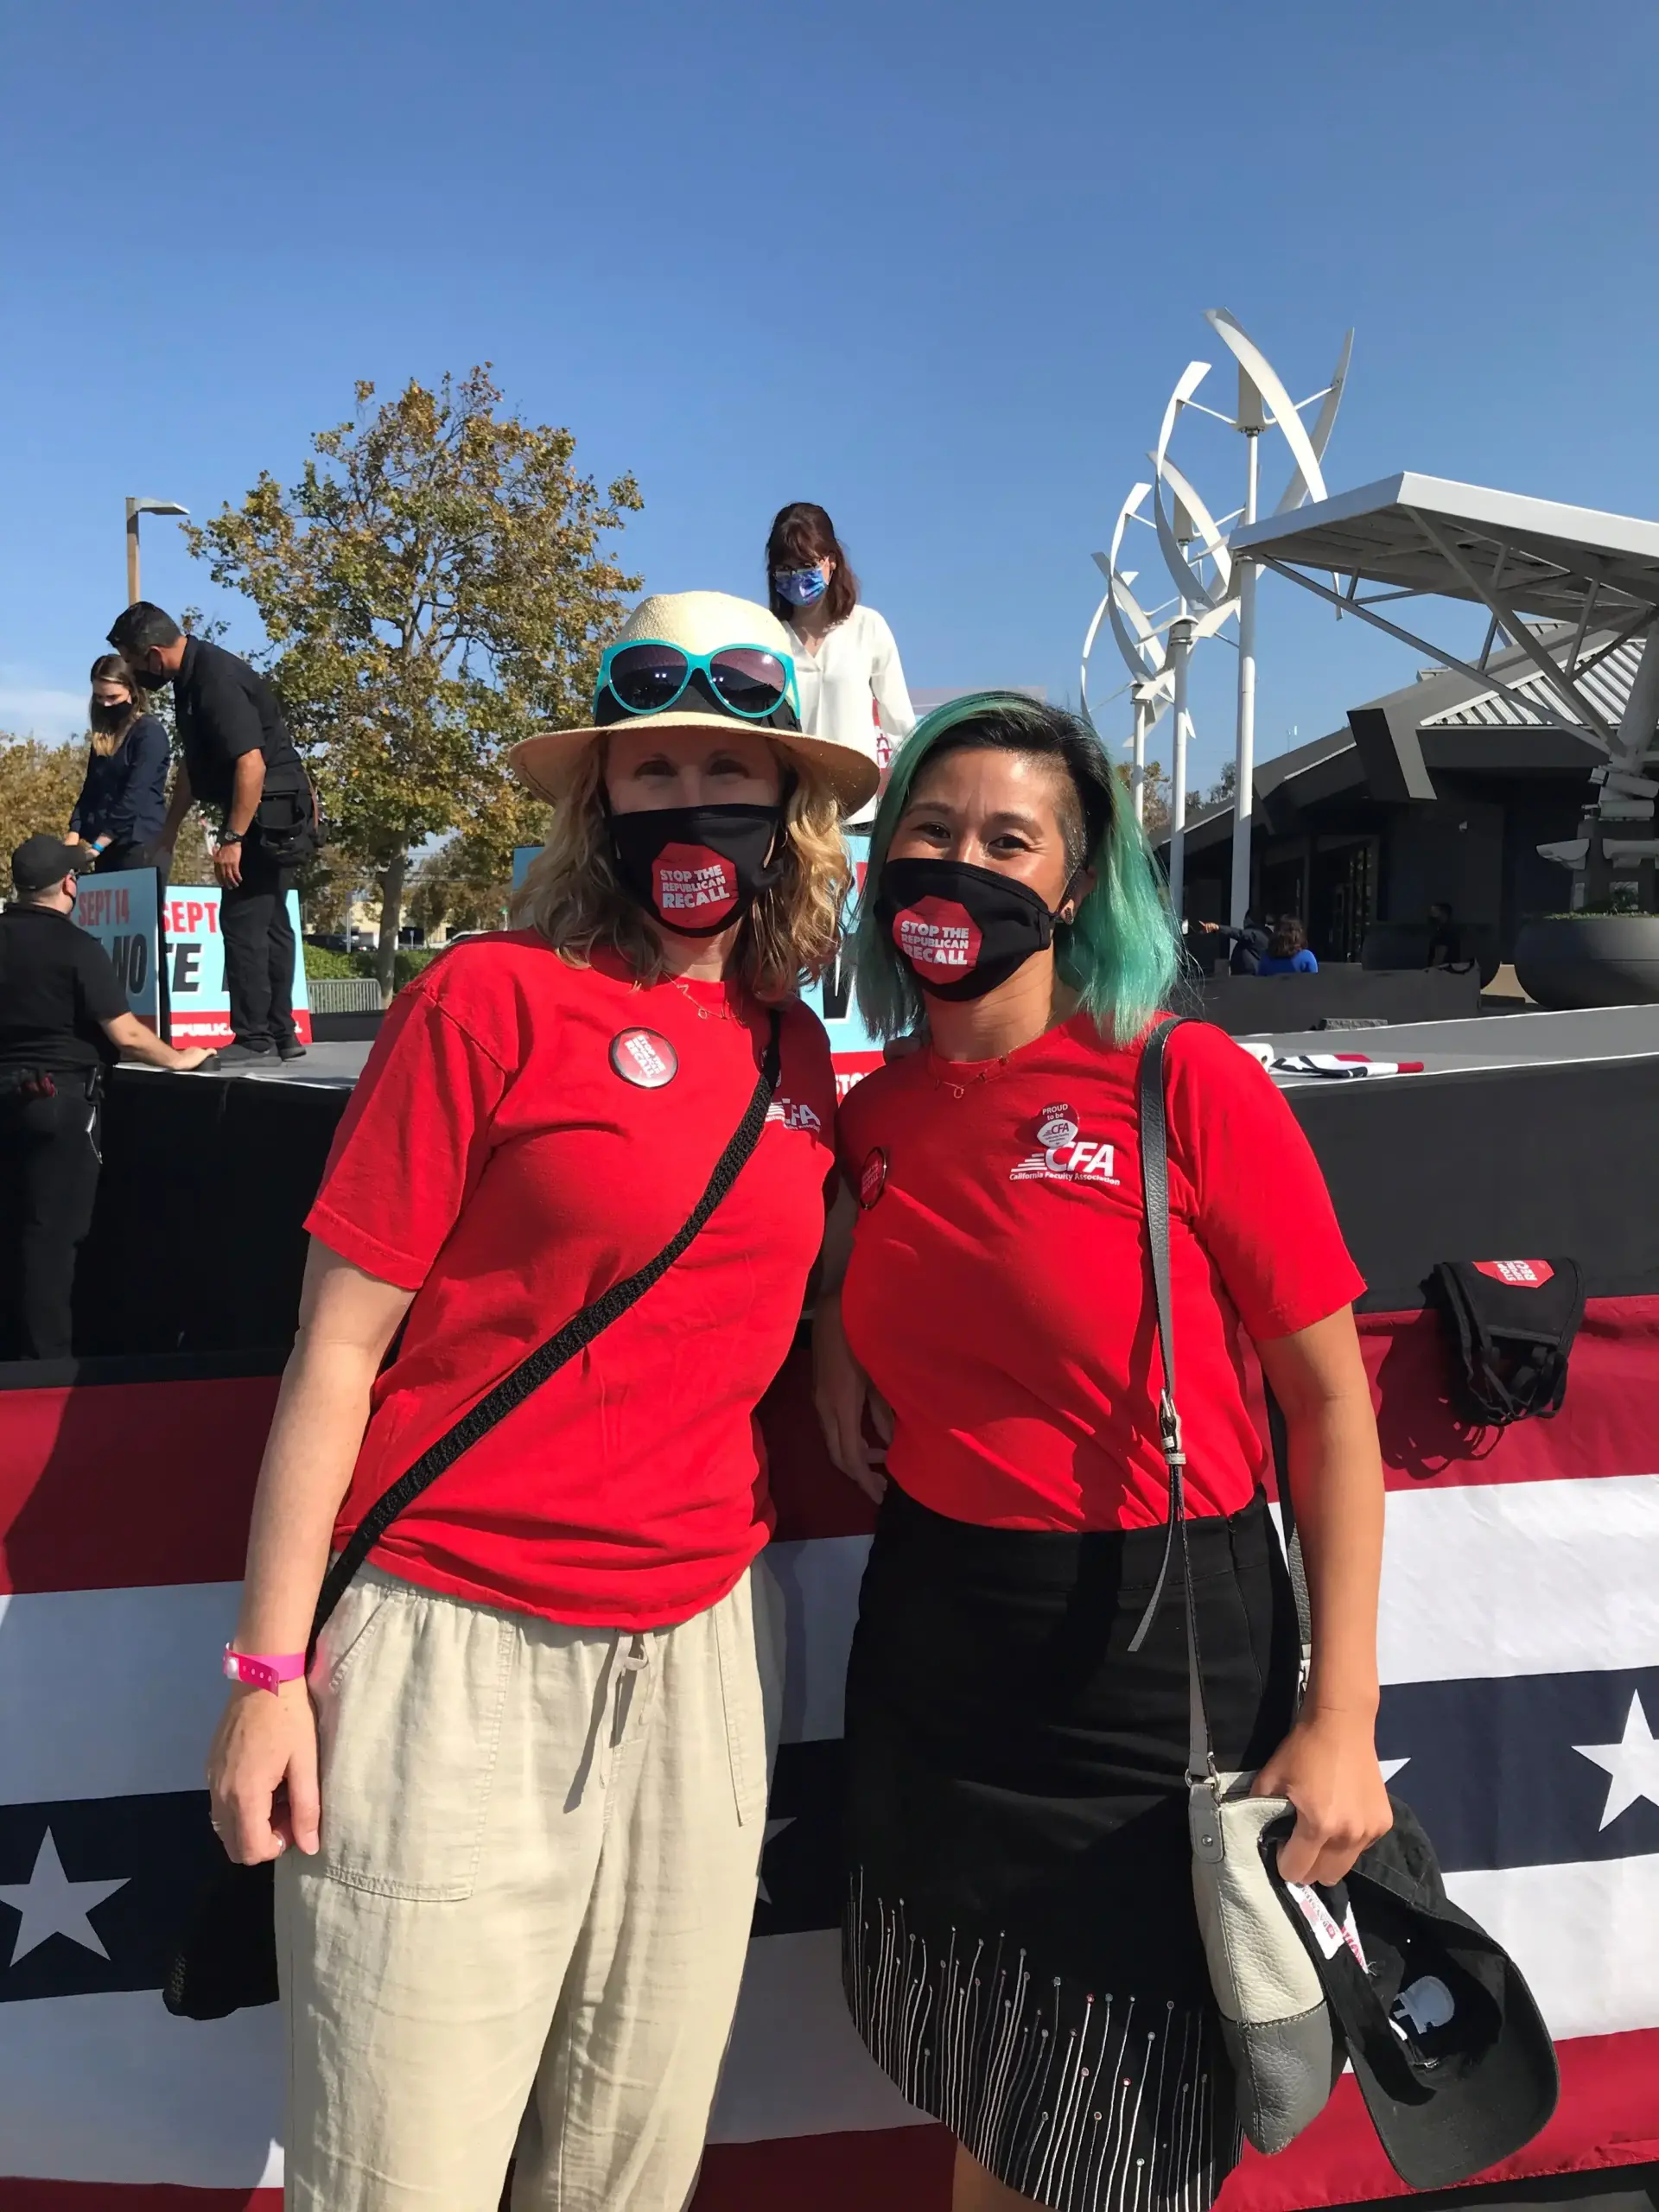 CFA East Bay members Amy Below and Danvy Le attend attend a No on the Recall rally in their red CFA shirts and anti-recall black and red face masks.